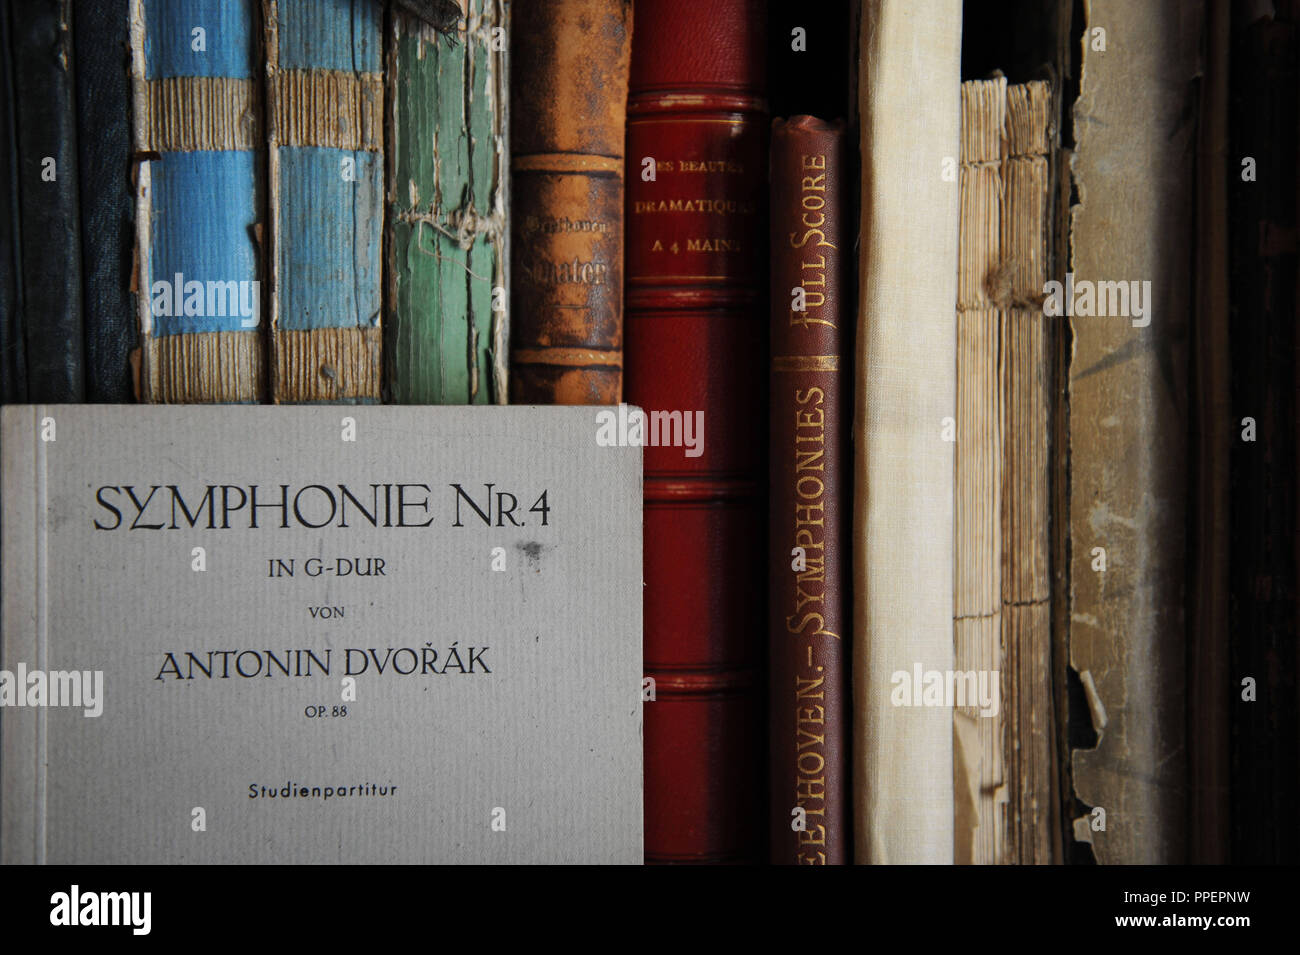 Notes of the Symphony no.4 in G major by Antonin Dvorak in the music antiquarian bookshop owned by Michael Raab near the Munich Arabellapark, Germany Stock Photo